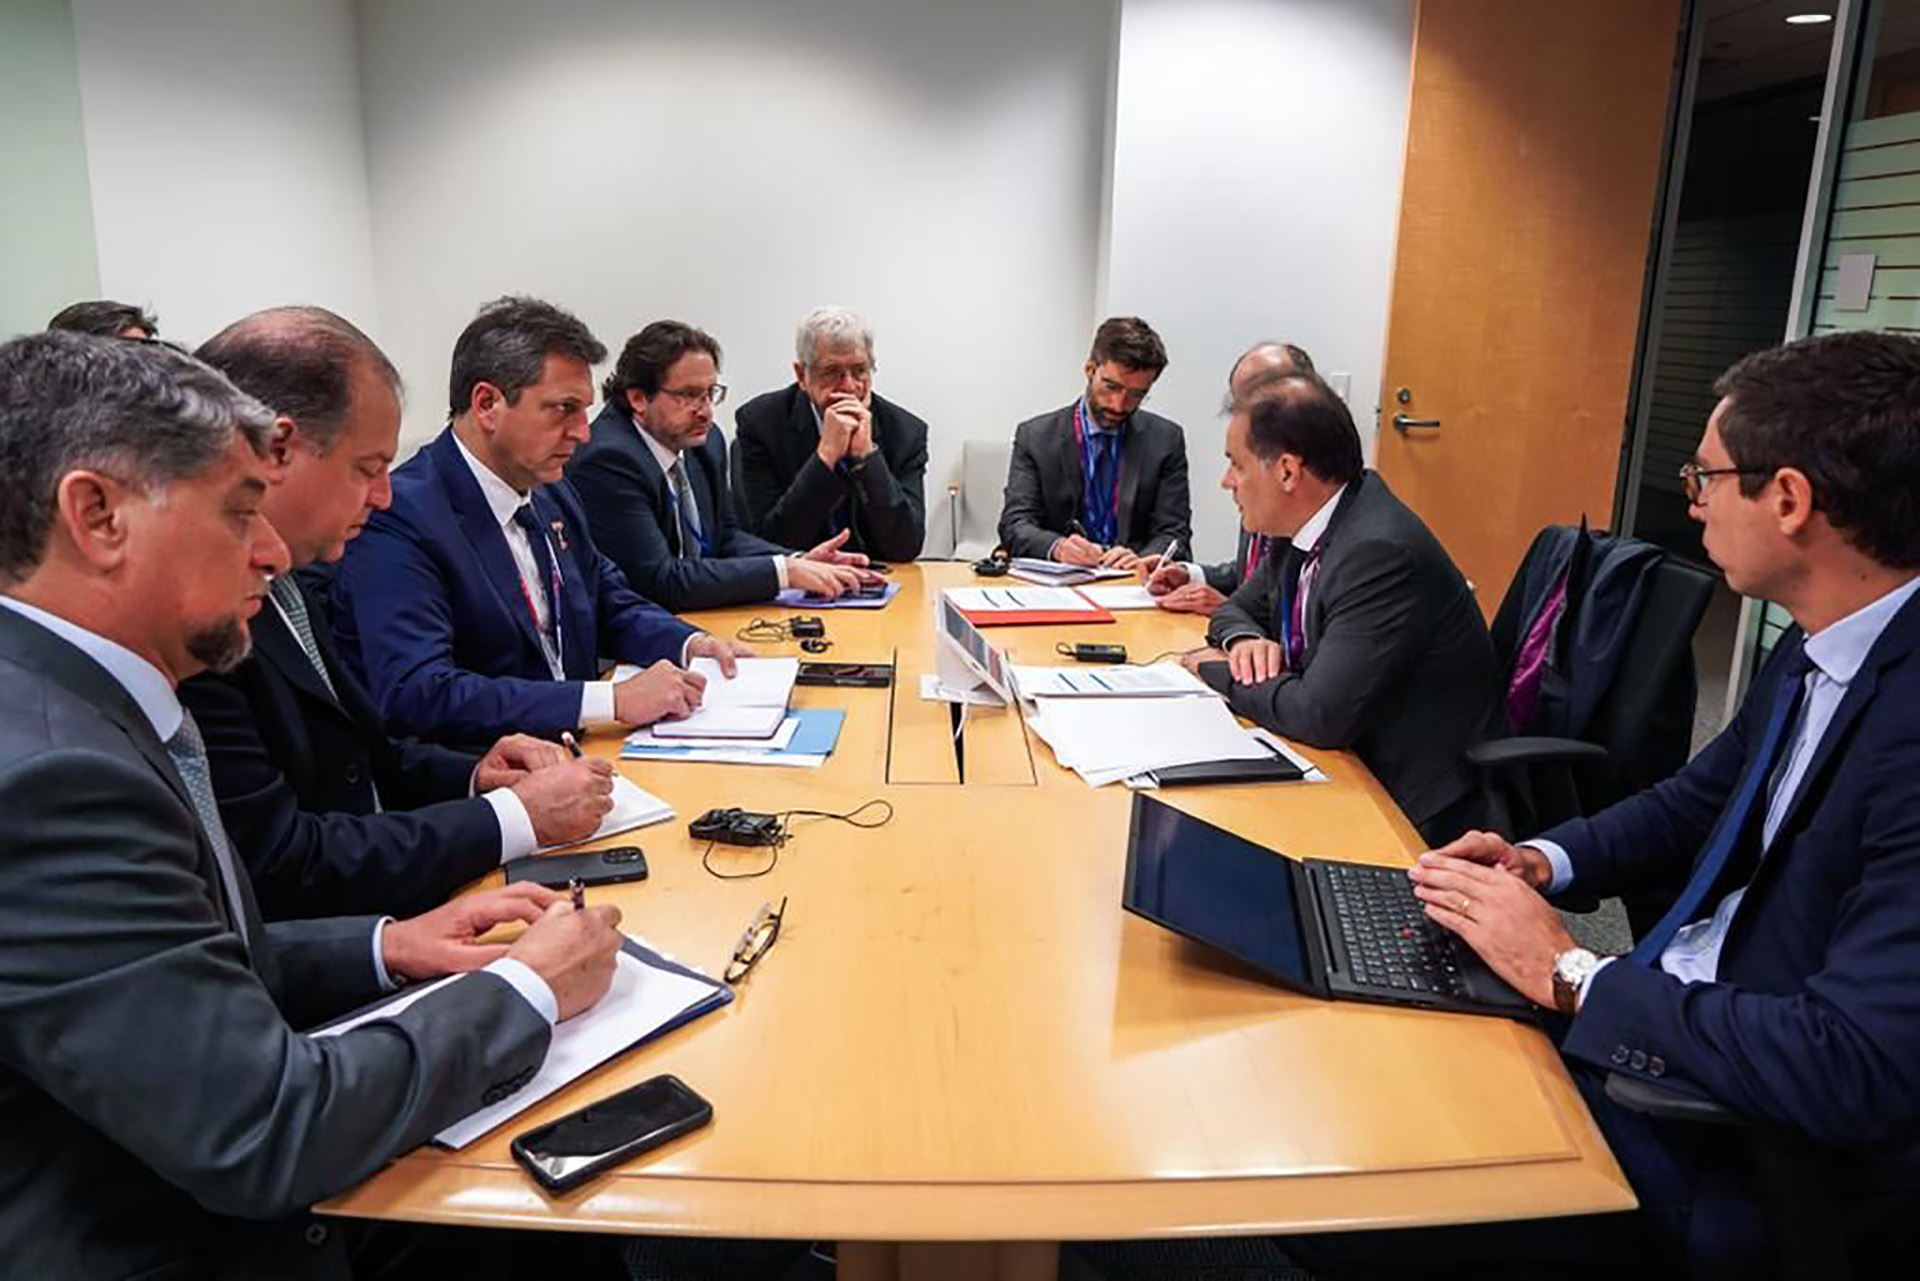 The Argentine Economic Group interacted with Paris Club officials during the recent IMF Annual Meeting in Washington